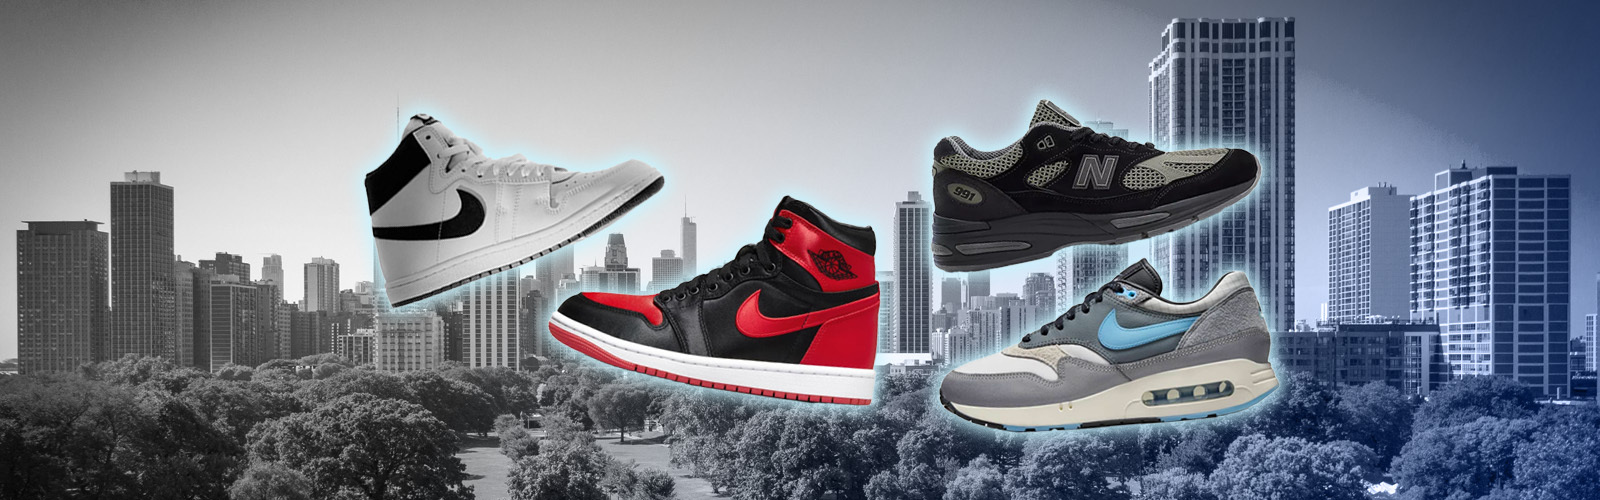 Air Jordan and Supreme team up to collaborate on sneakers, break